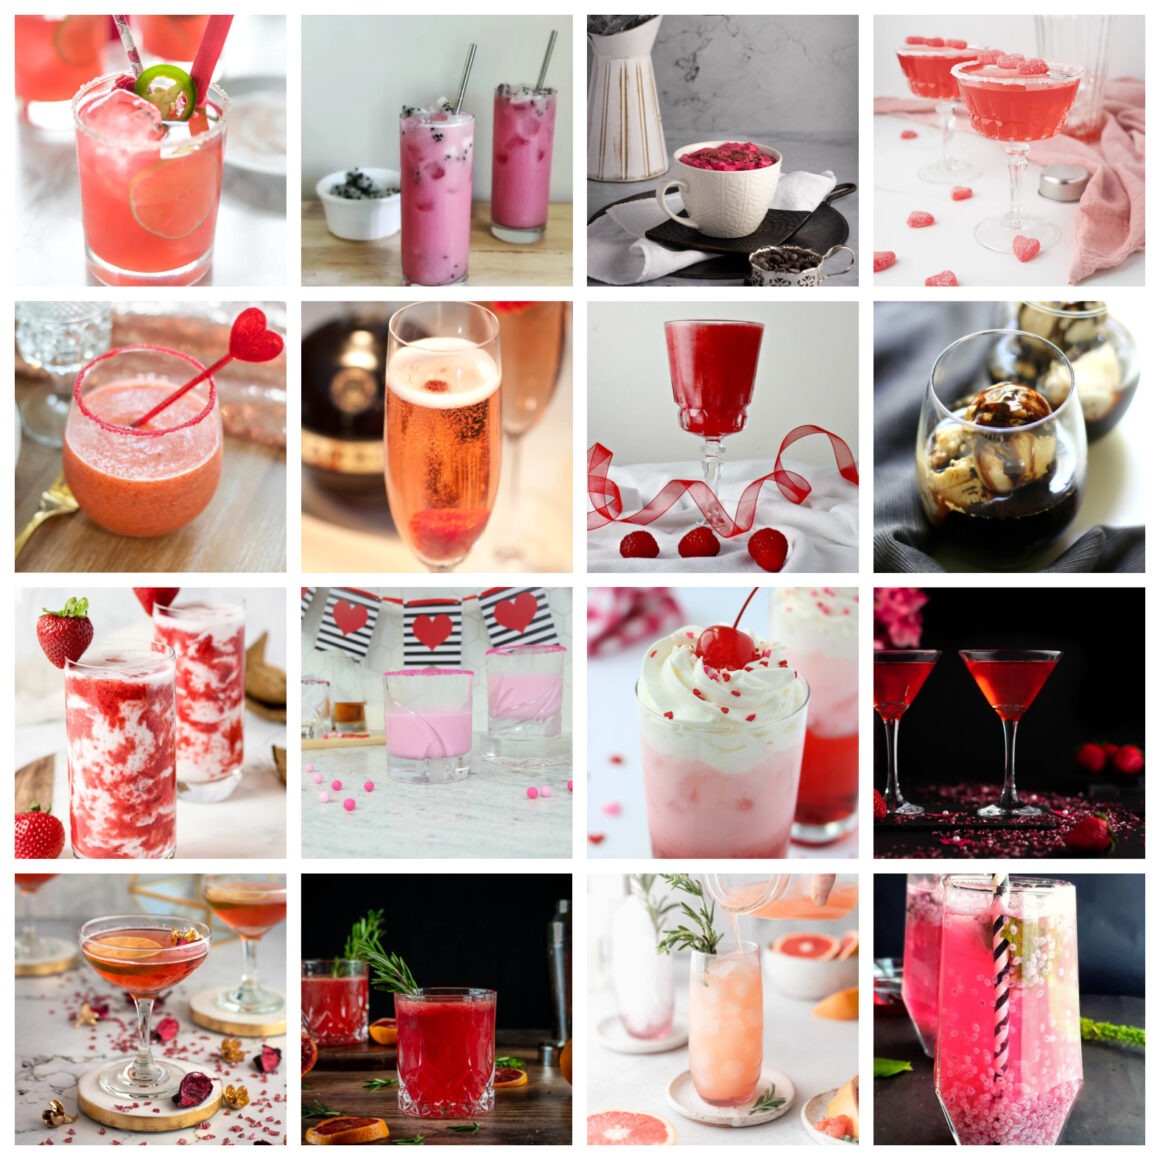 The Best Valentine's Day Drink Recipes by Champagne and Sugarplums